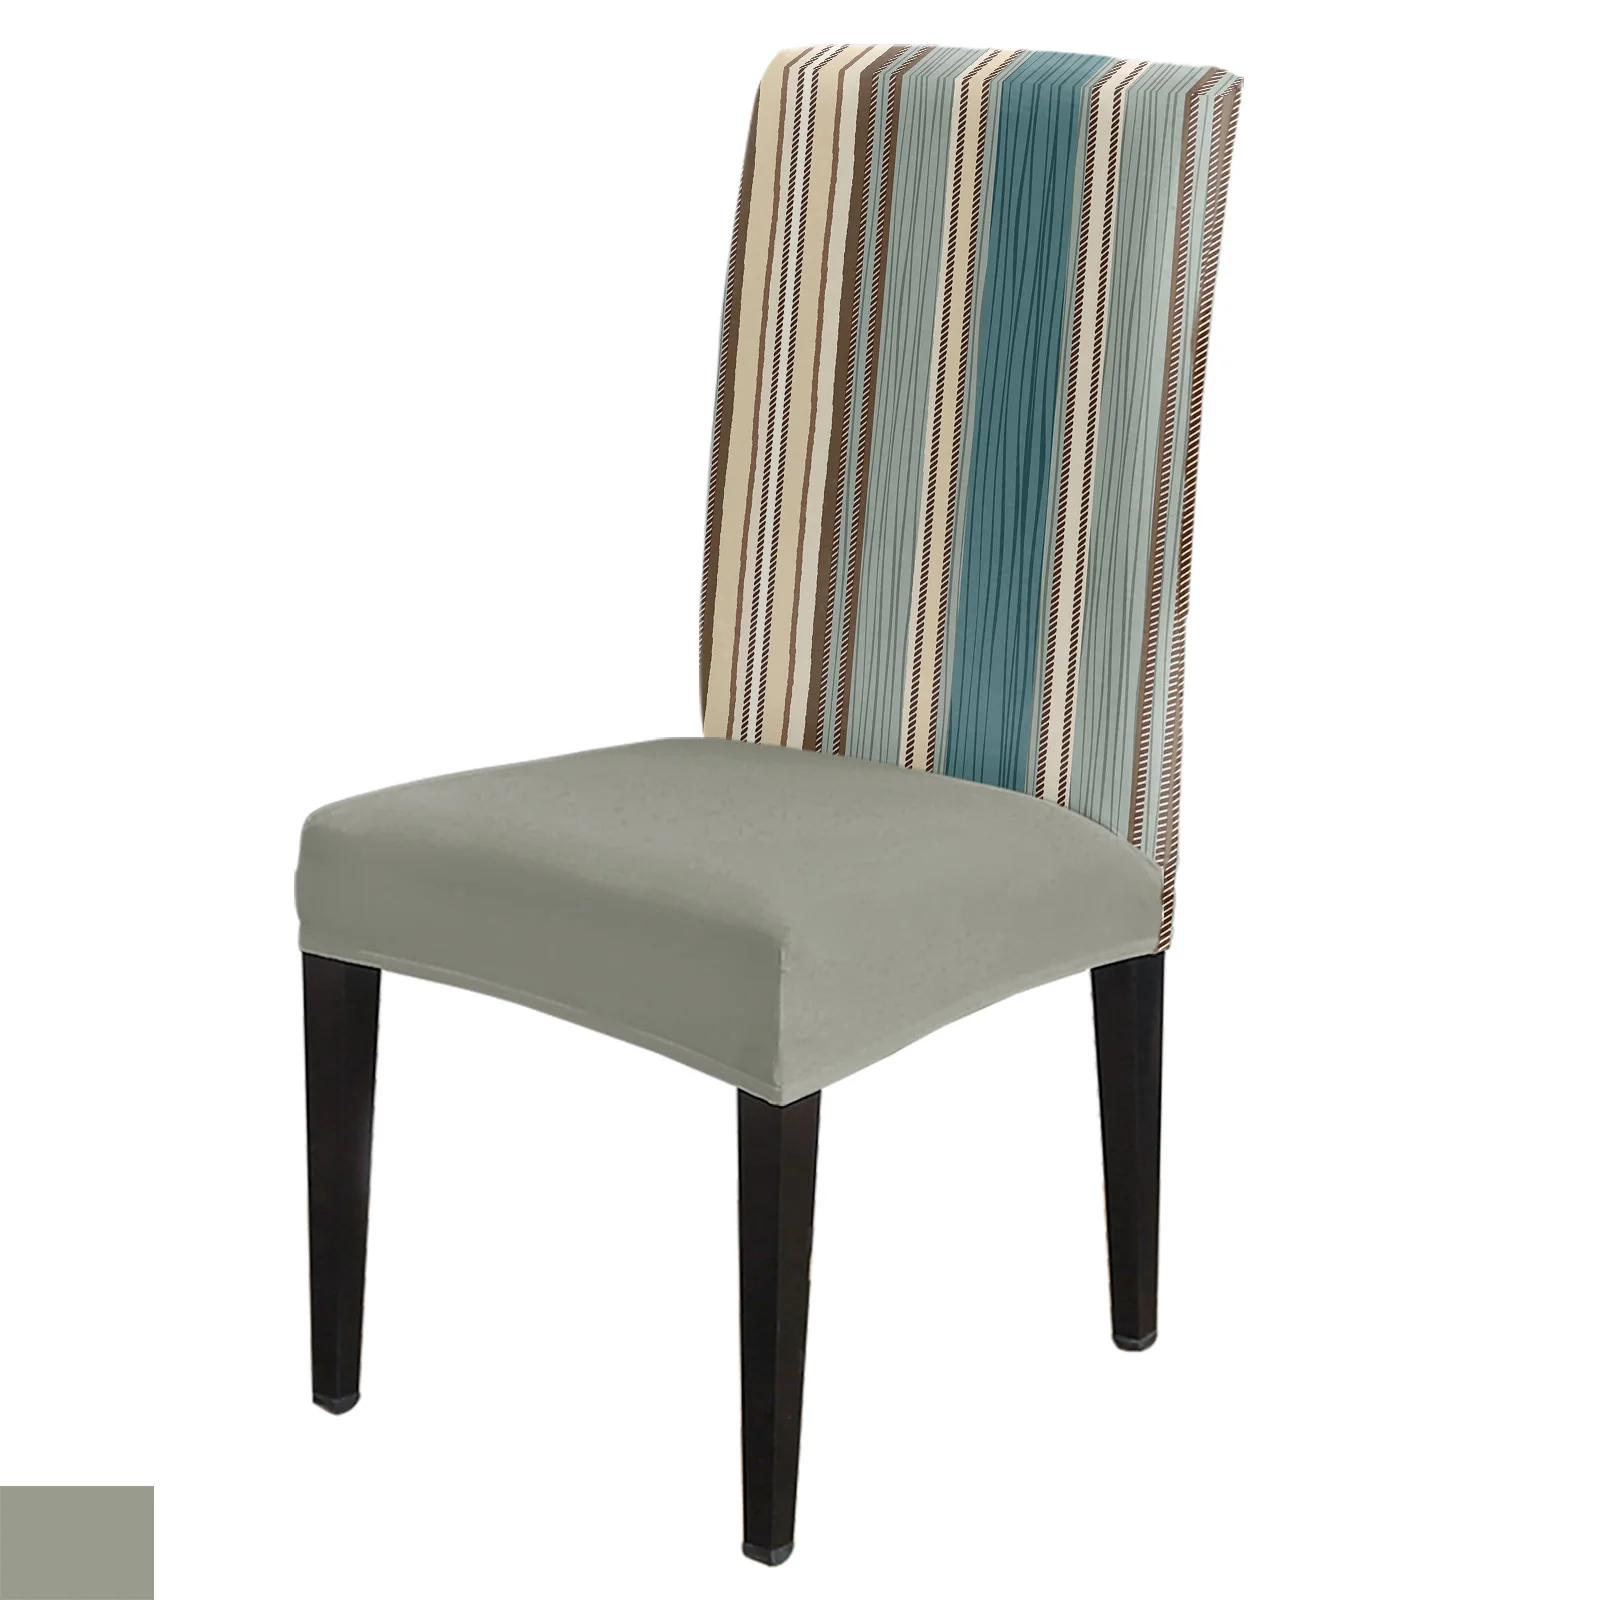 Striped Boho Teal Printed Stretch Chair Cover Kitchen Dining Elastic Seat Chair Covers Chair Slipcovers for Wedding